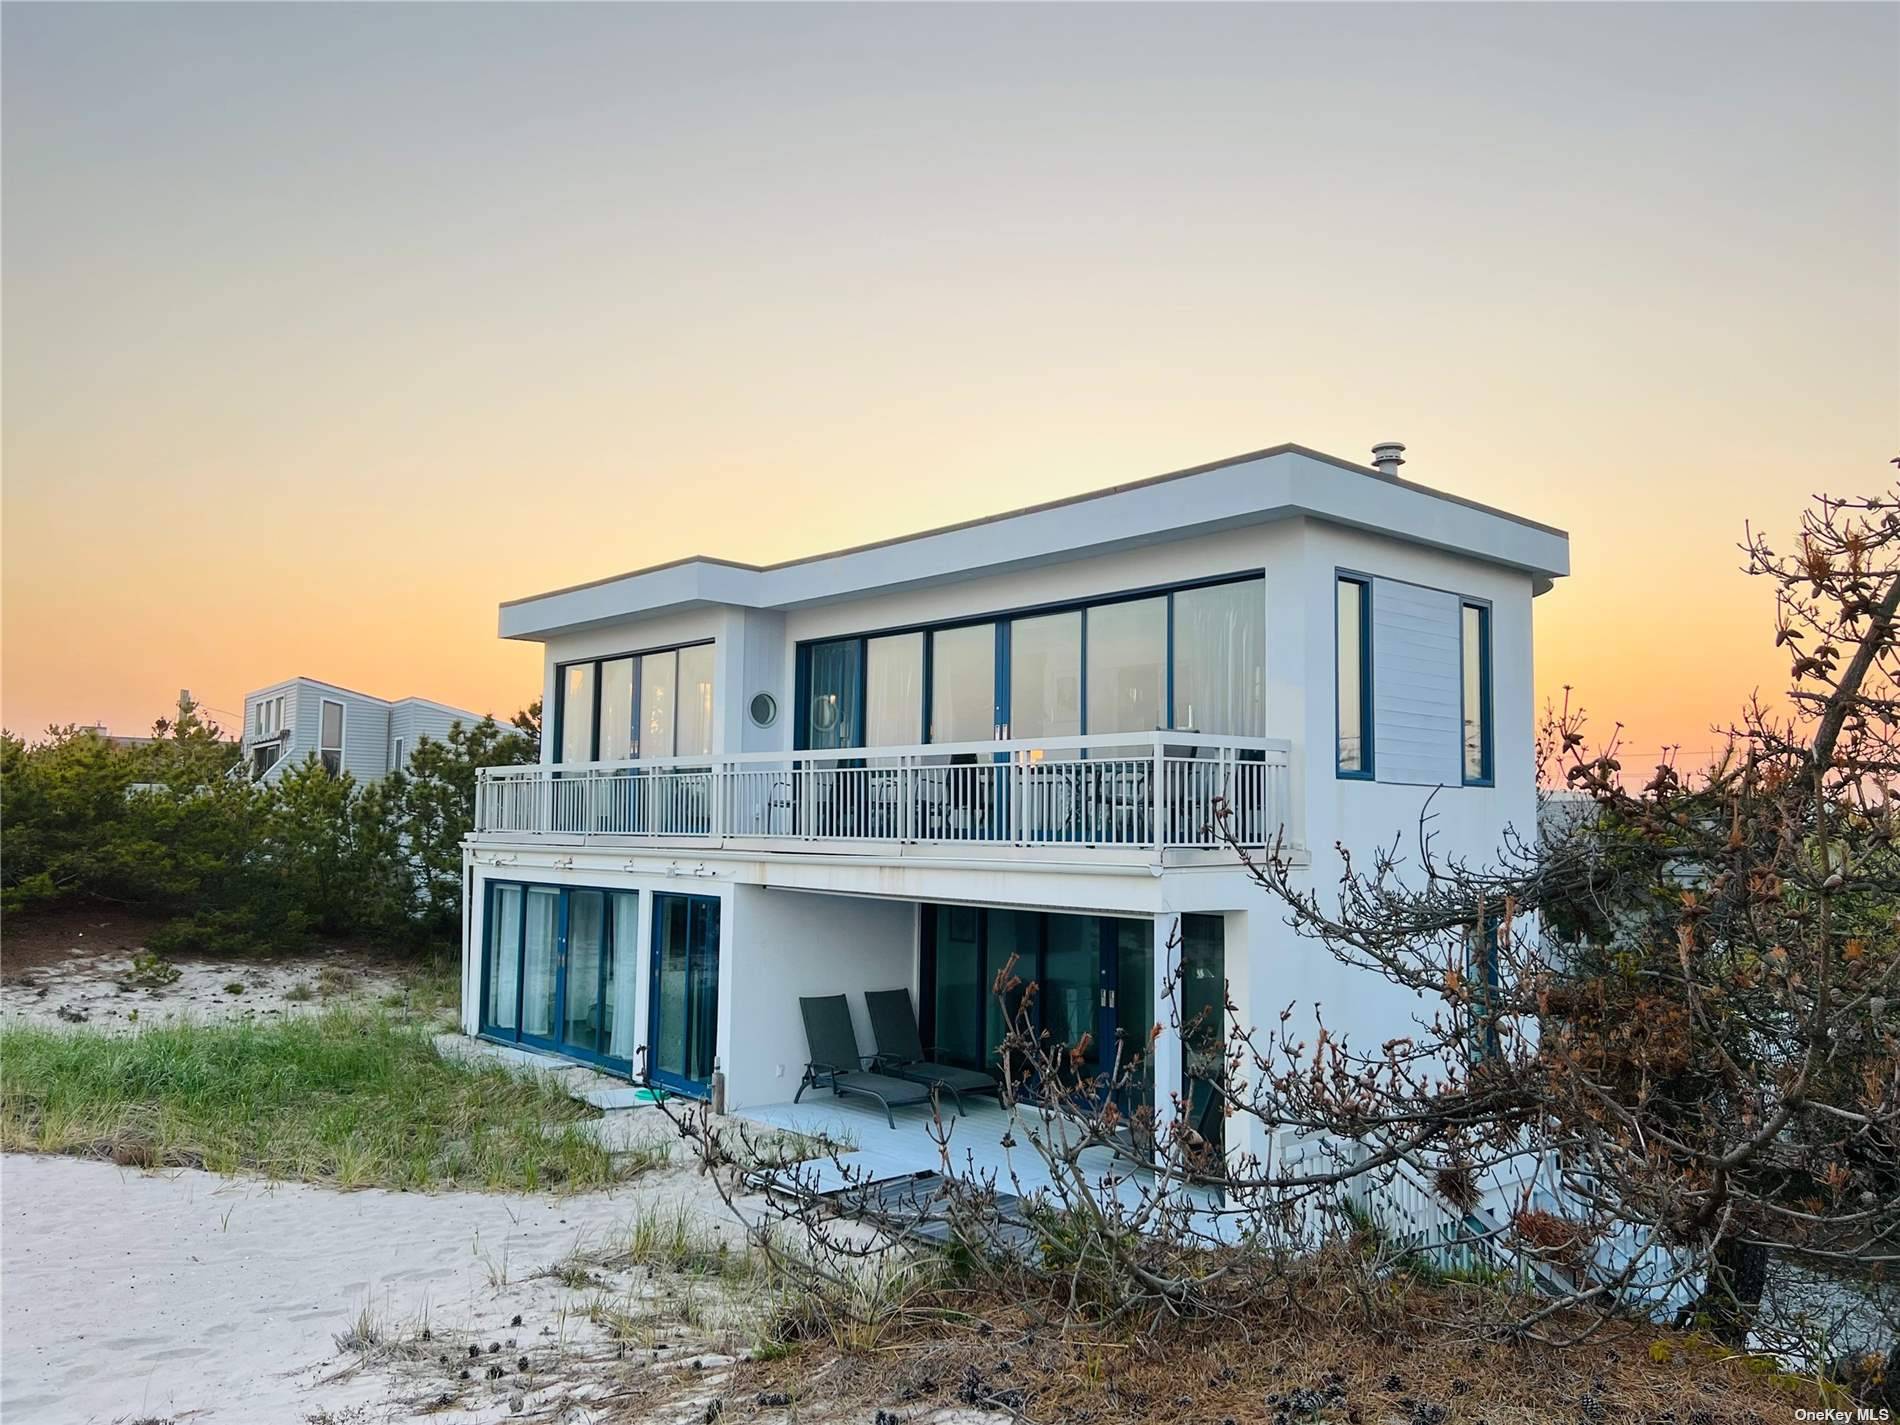 Ingeniously built, custom oceanfront home now available for purchase.